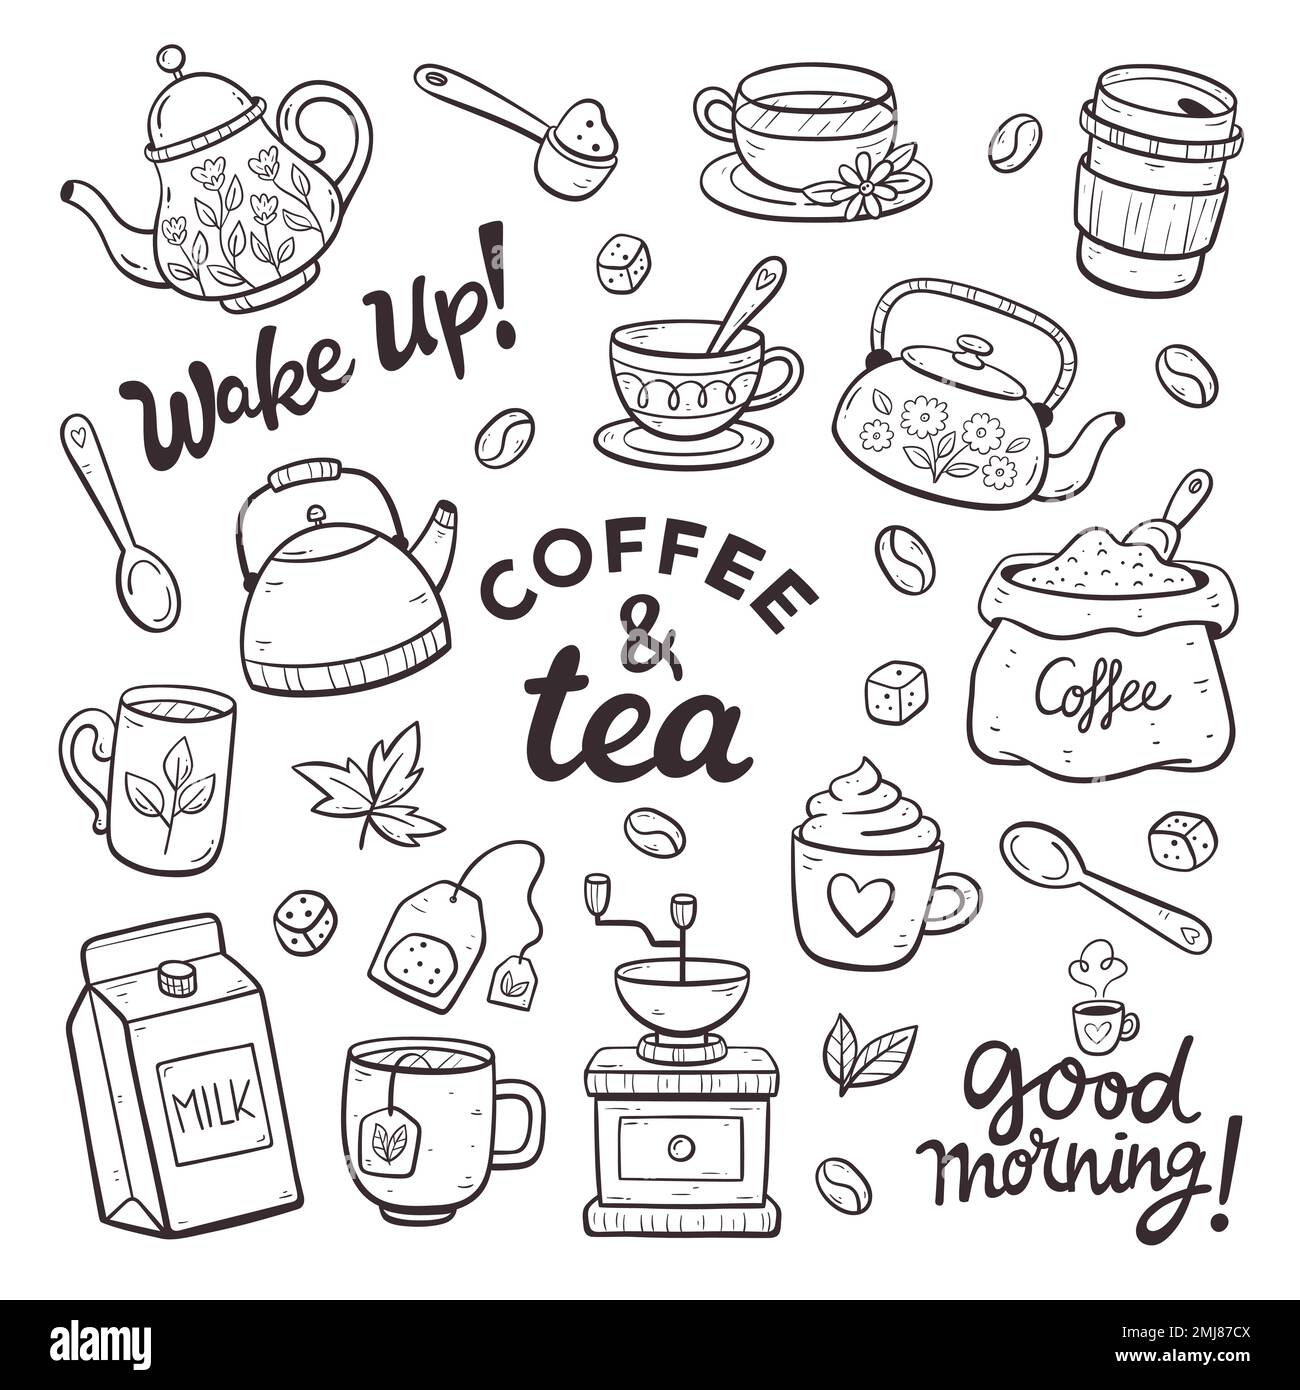 Collection of coffee and tea products. Doodle cliparts of teapots, cups, coffee, herbal teas... Isolated objects on a white background. Background to Stock Vector